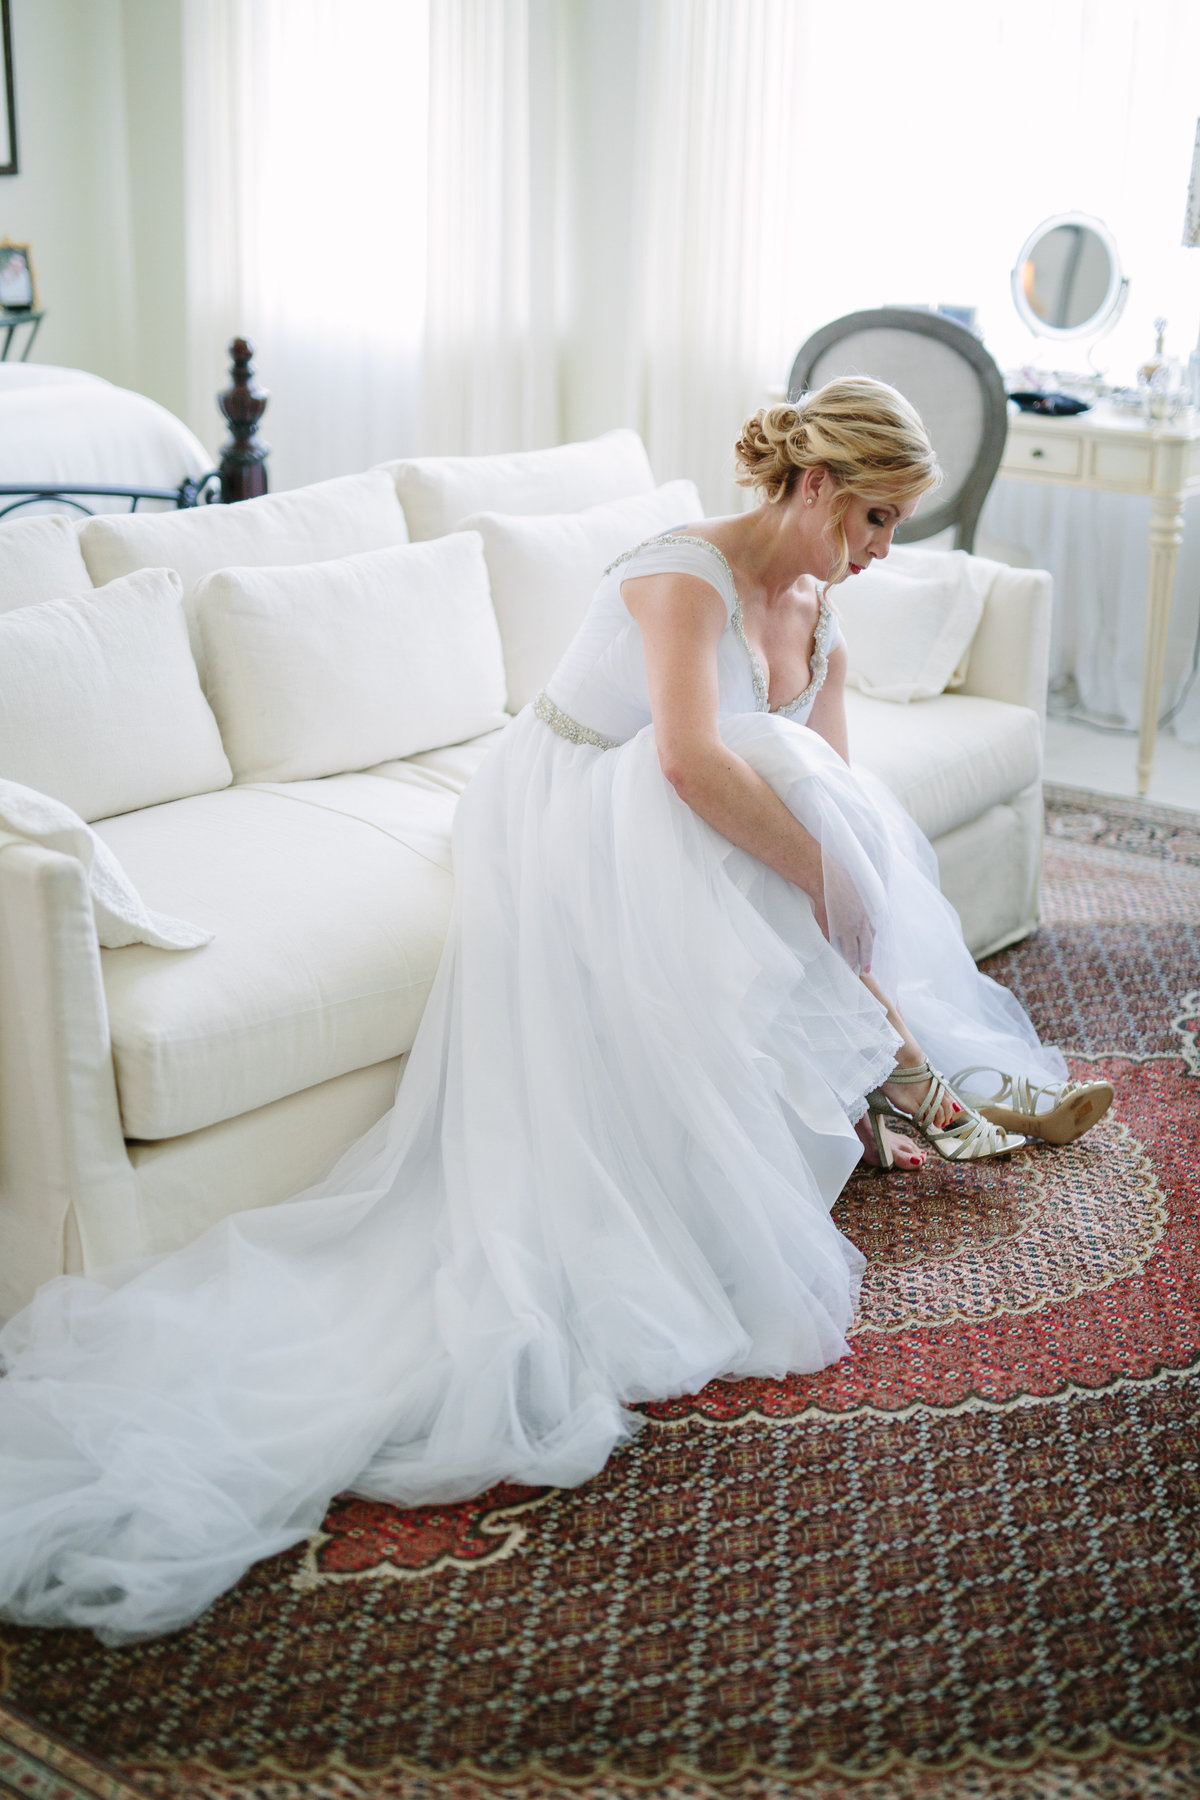 Bride putting her wedding shoes on during getting ready at home in San Antonio